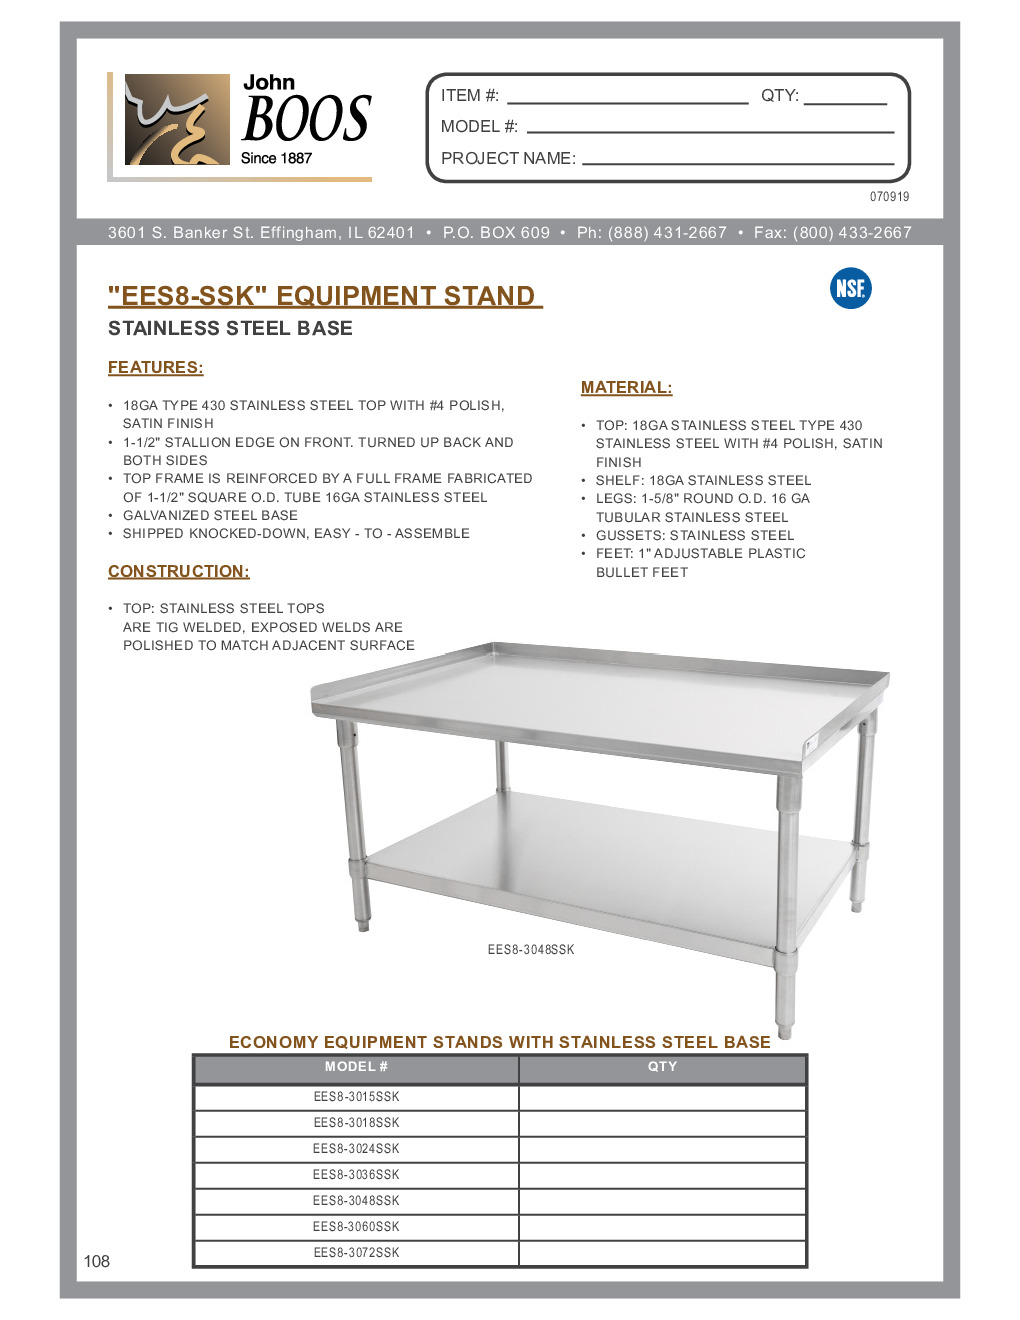 John Boos EES8-3060SSK-X for Countertop Cooking Equipment Stand